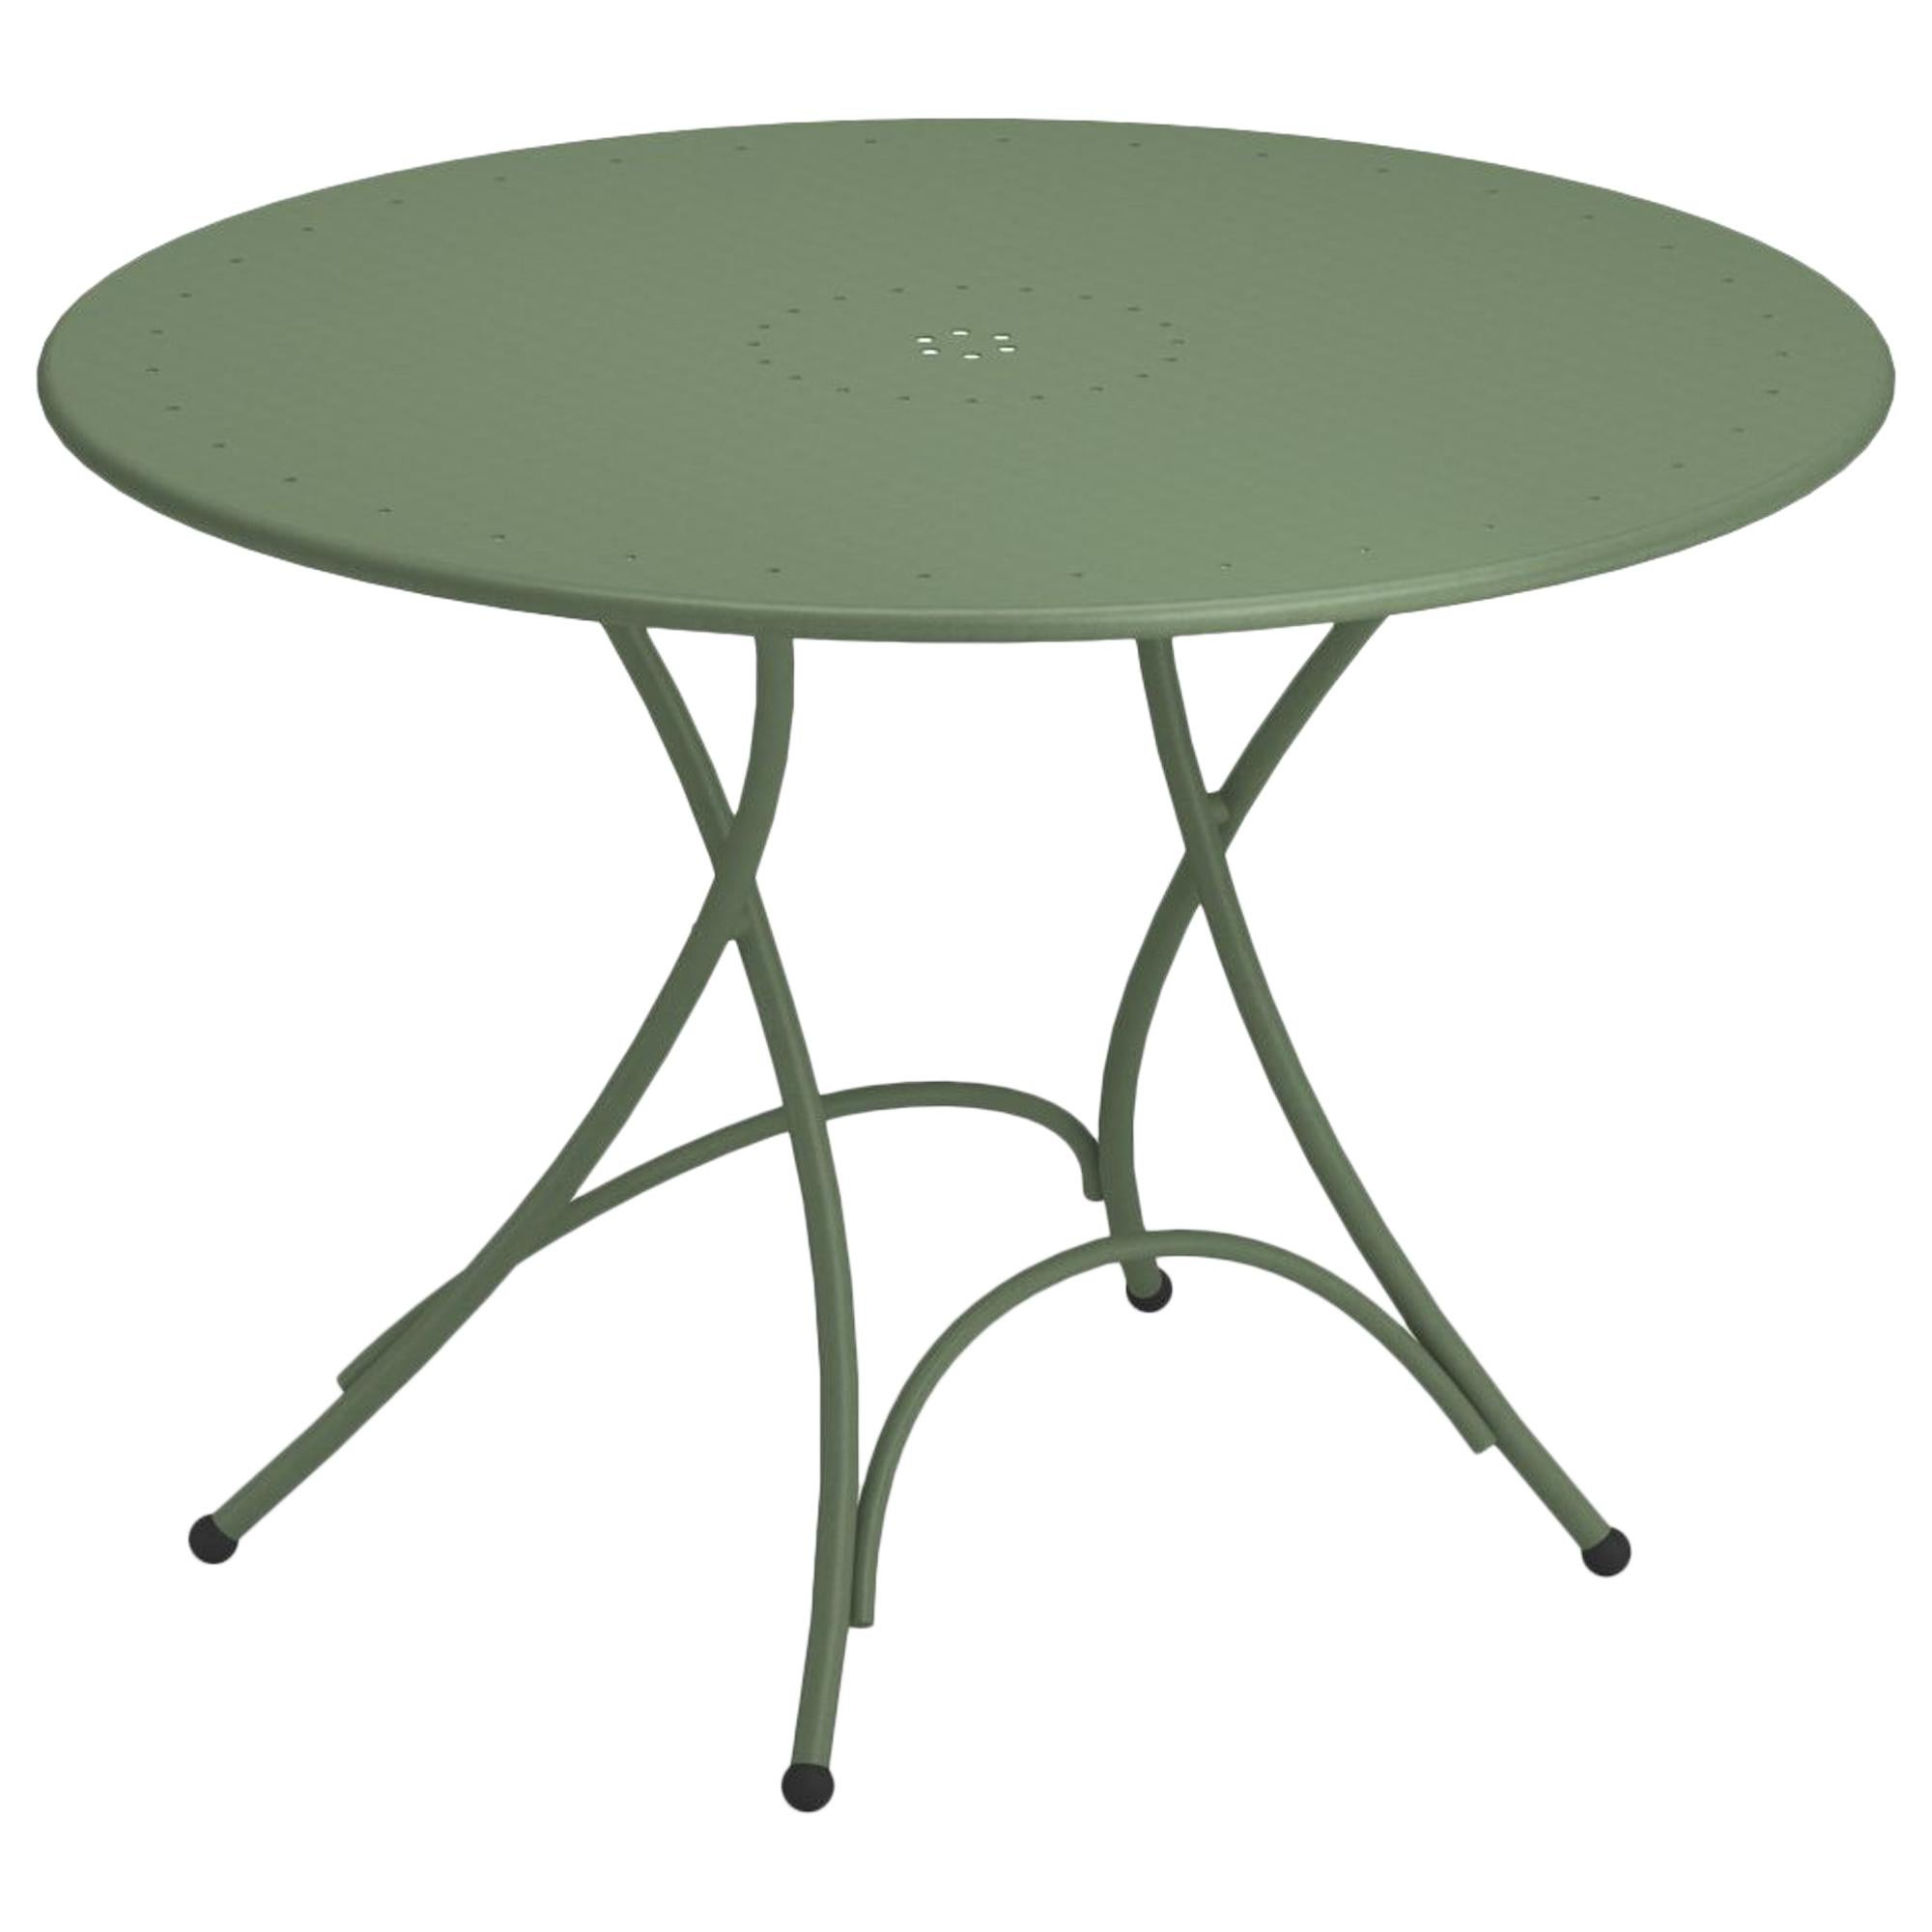 Steel EMU Pigalle 5 Seats Folding Round Table For Sale